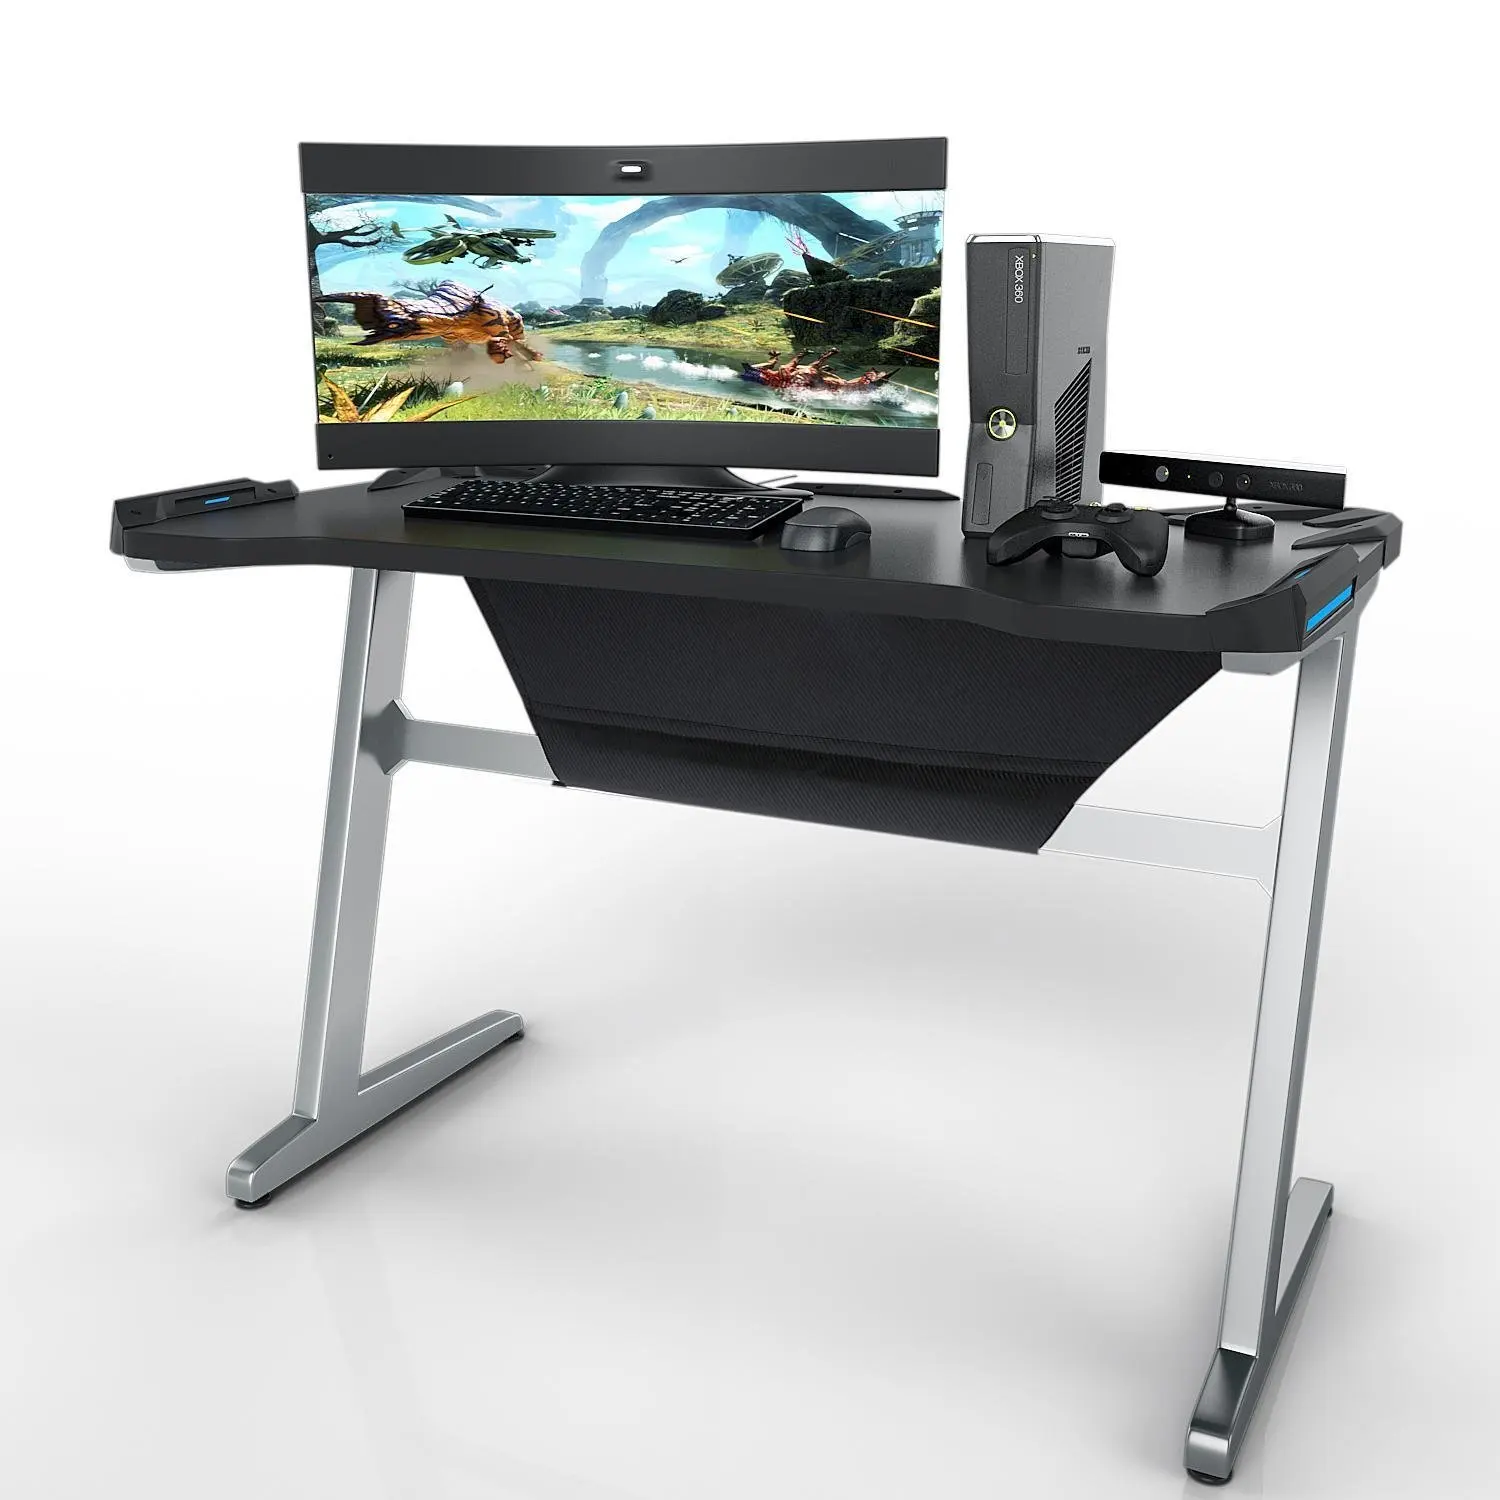 Cheap Pc Gaming Desk Find Pc Gaming Desk Deals On Line At Alibaba Com